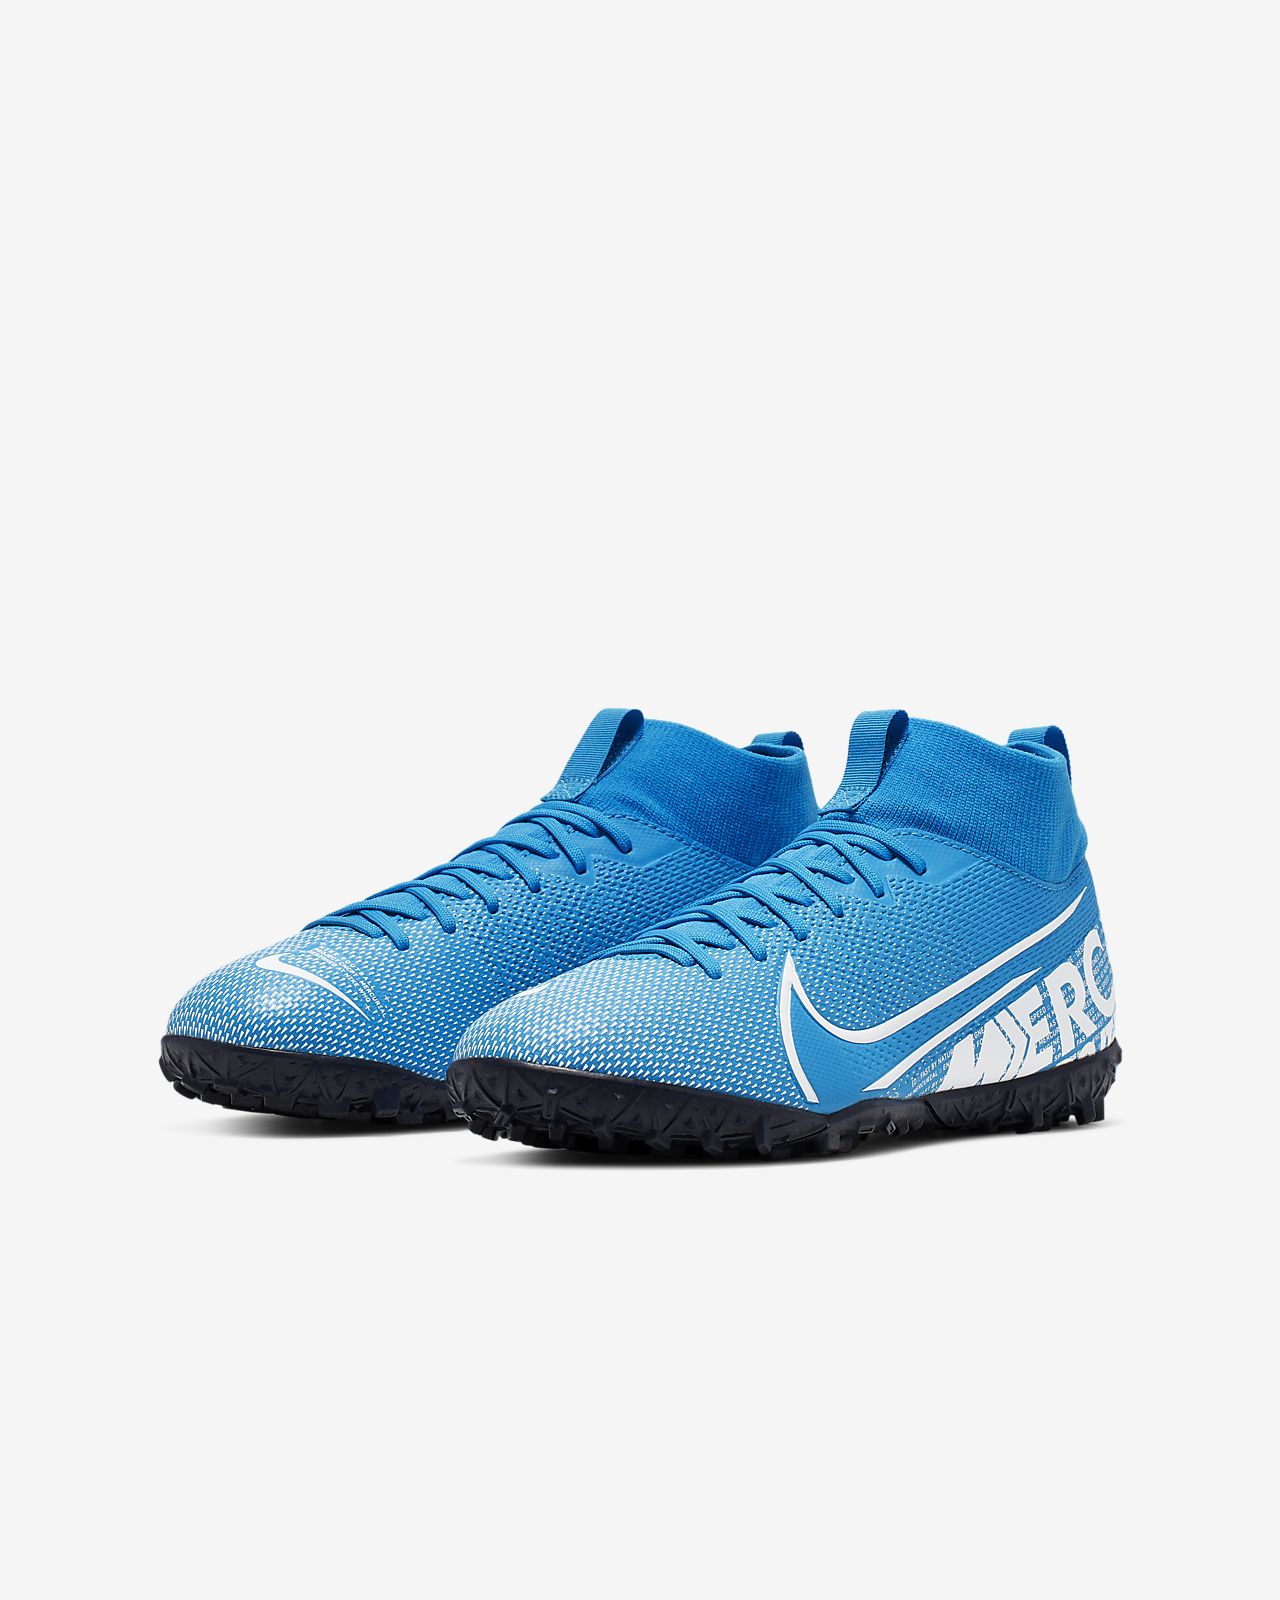 nike astro shoes